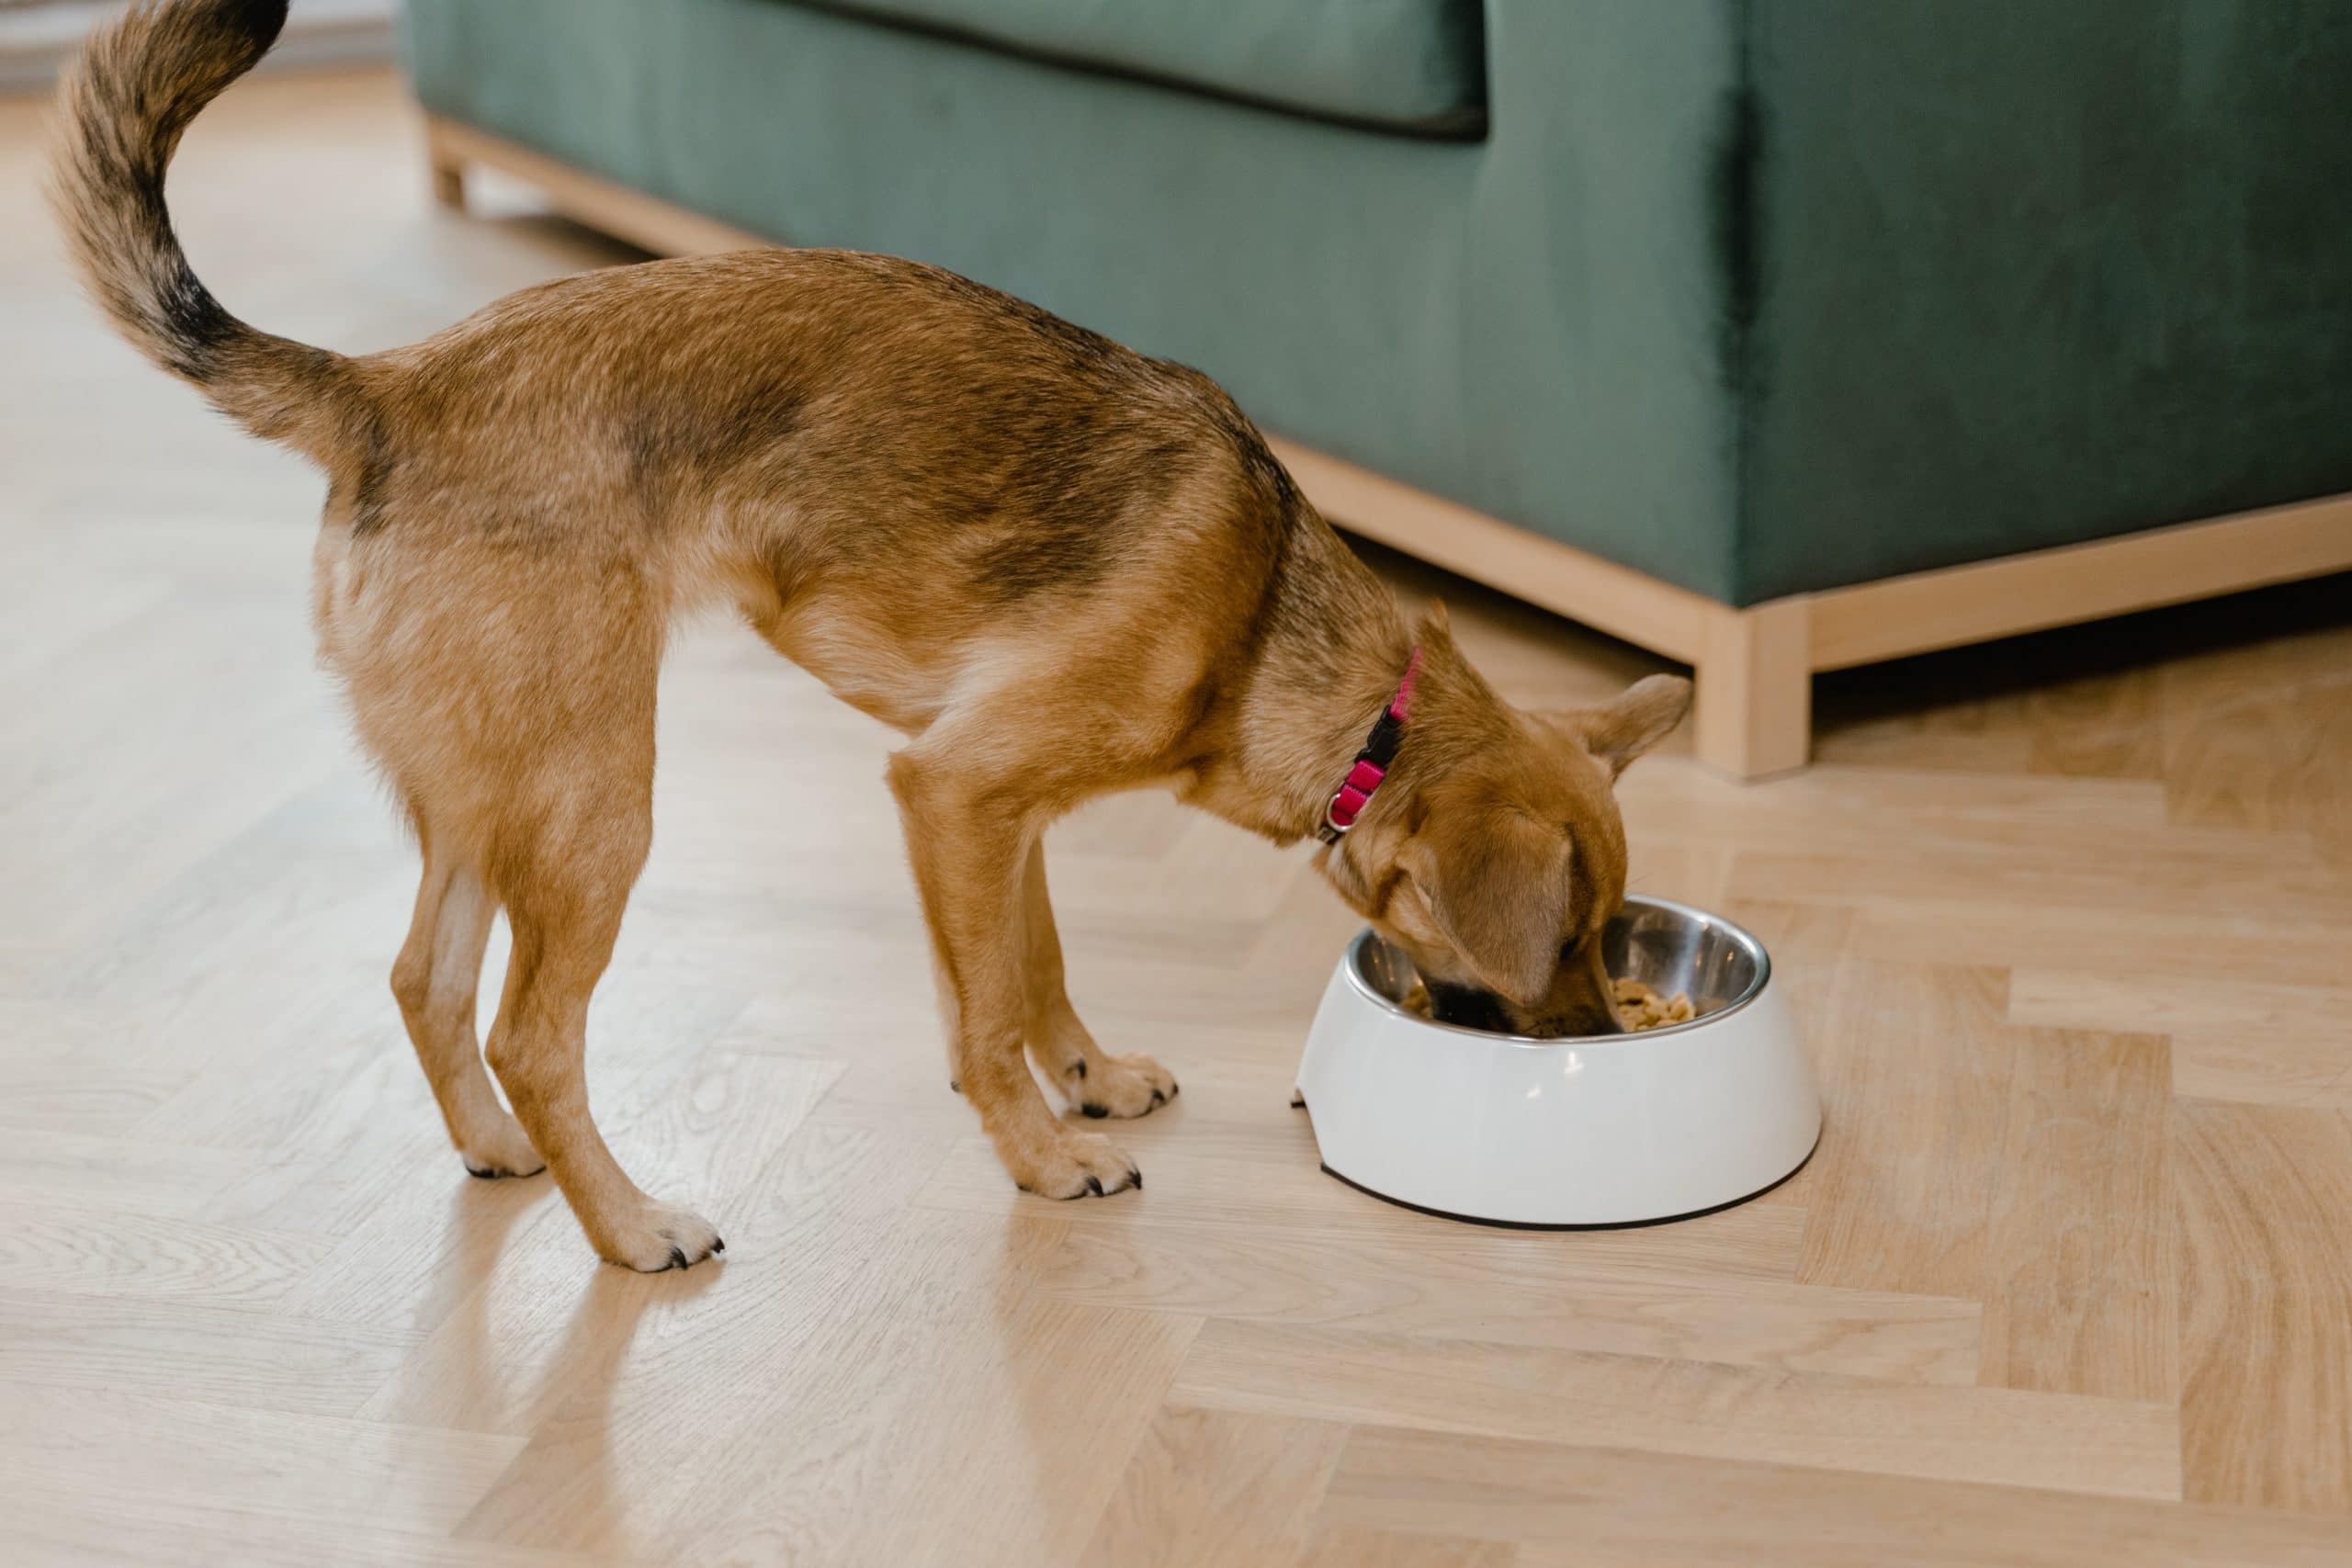 Dog eating from dish